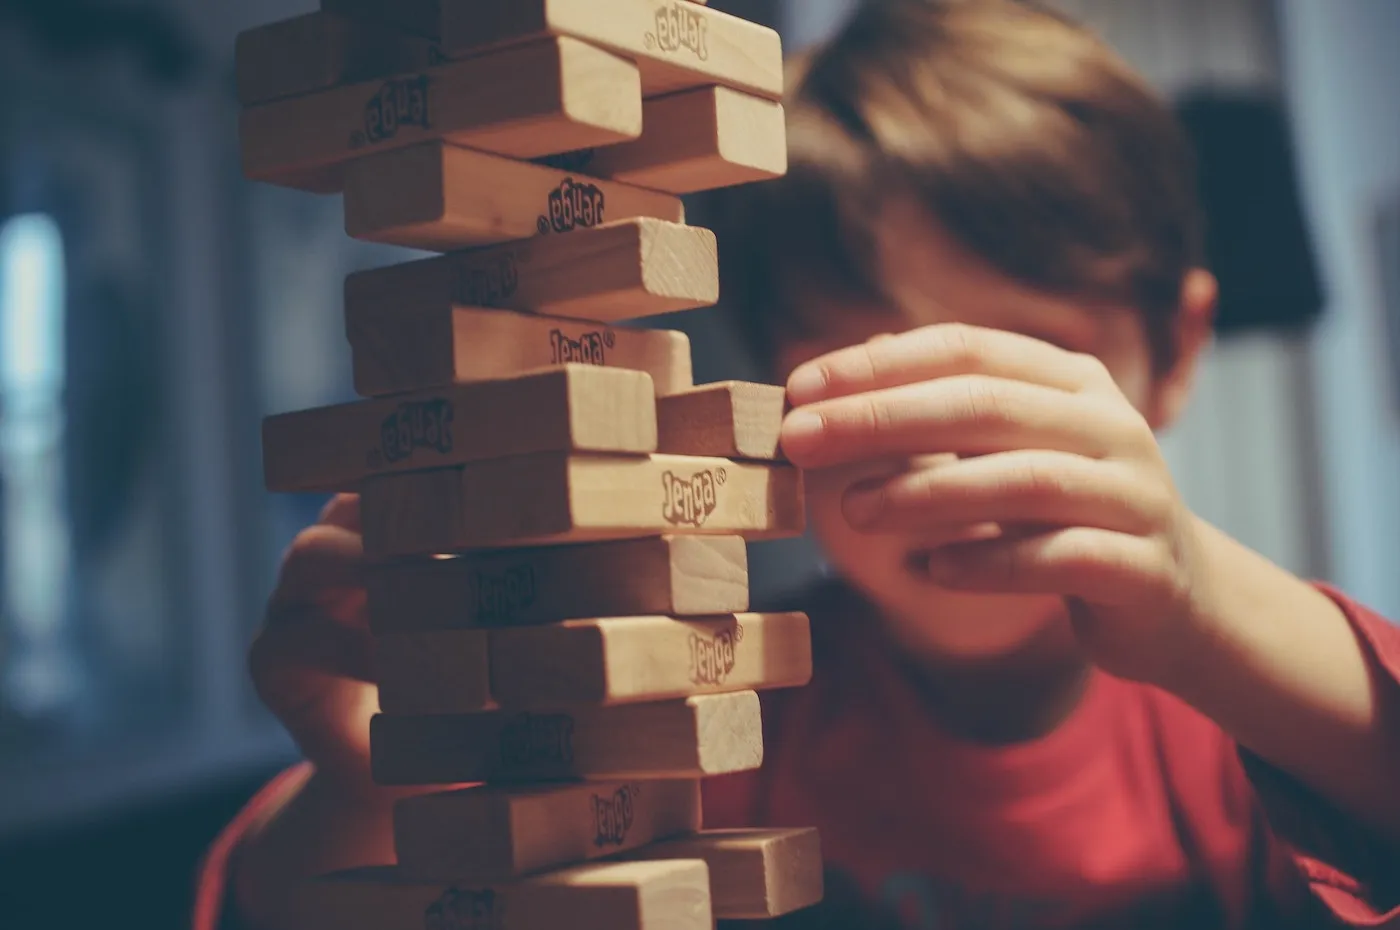 A kid playing Jenga as an analogy to the senior software engineer's soft skills and being able to take balanced decisions for the business